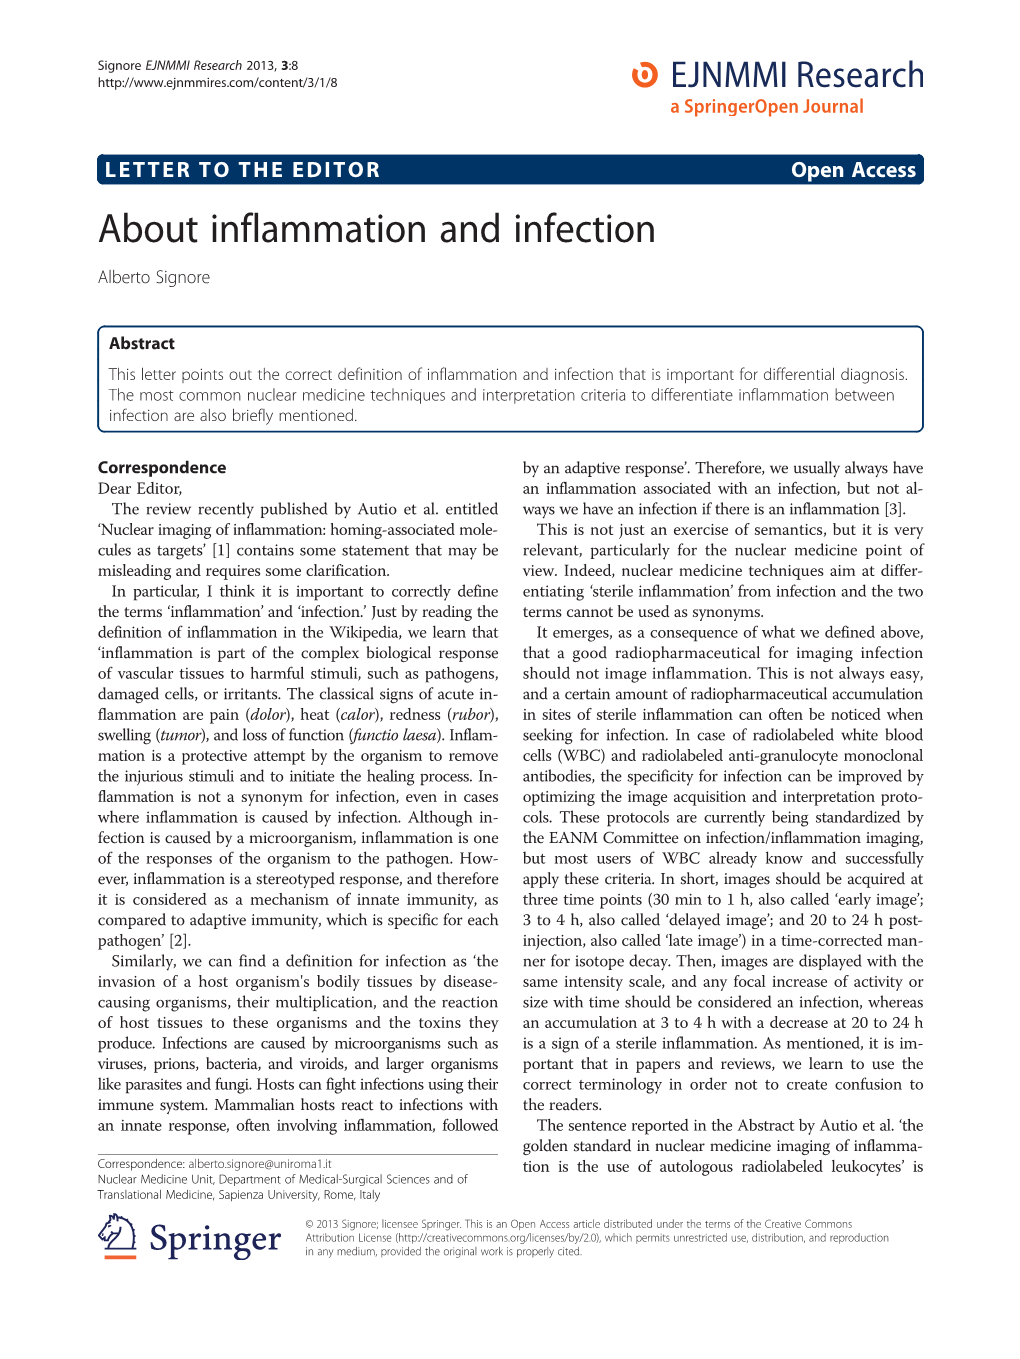 About Inflammation and Infection Alberto Signore